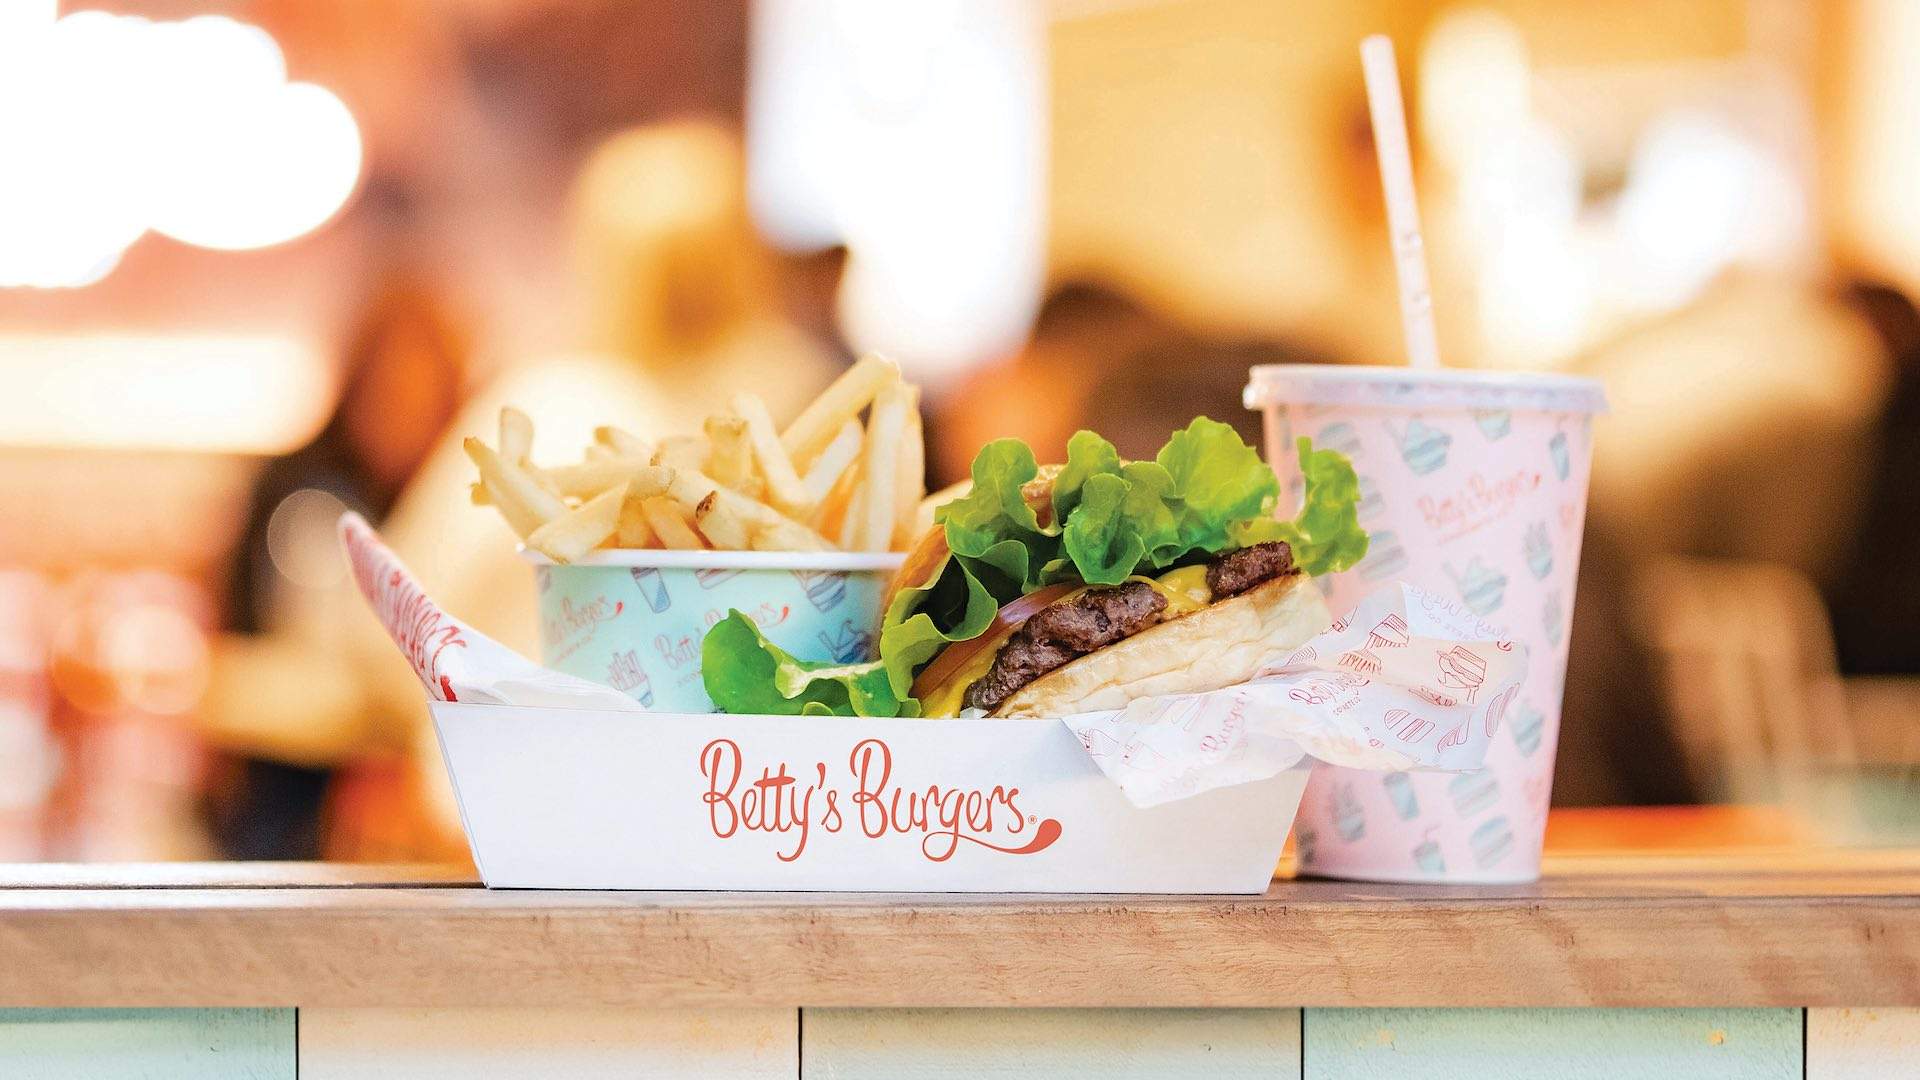 Treat Yourself to Gourmet Savings with the Betty's Burgers App Throughout July